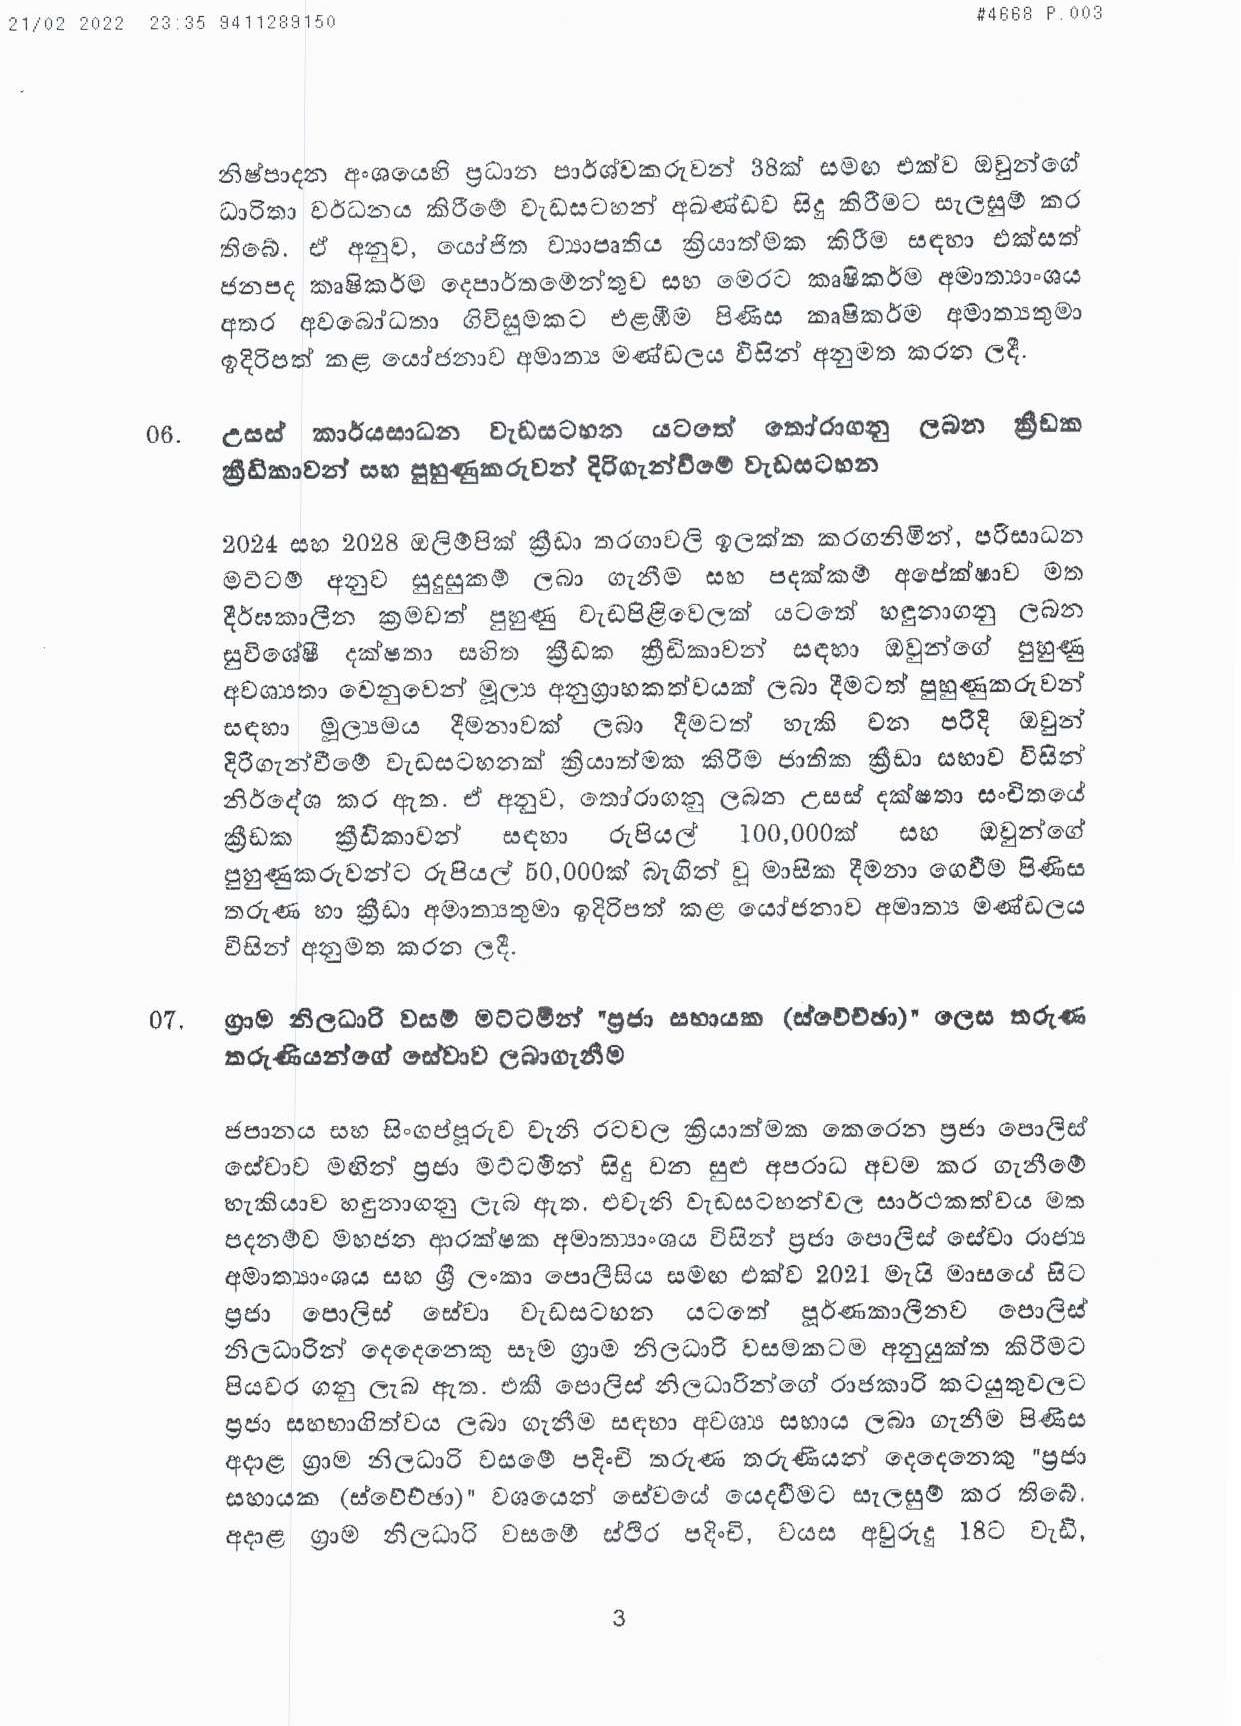 Cabinet Decision on 21.02.2022 page 003